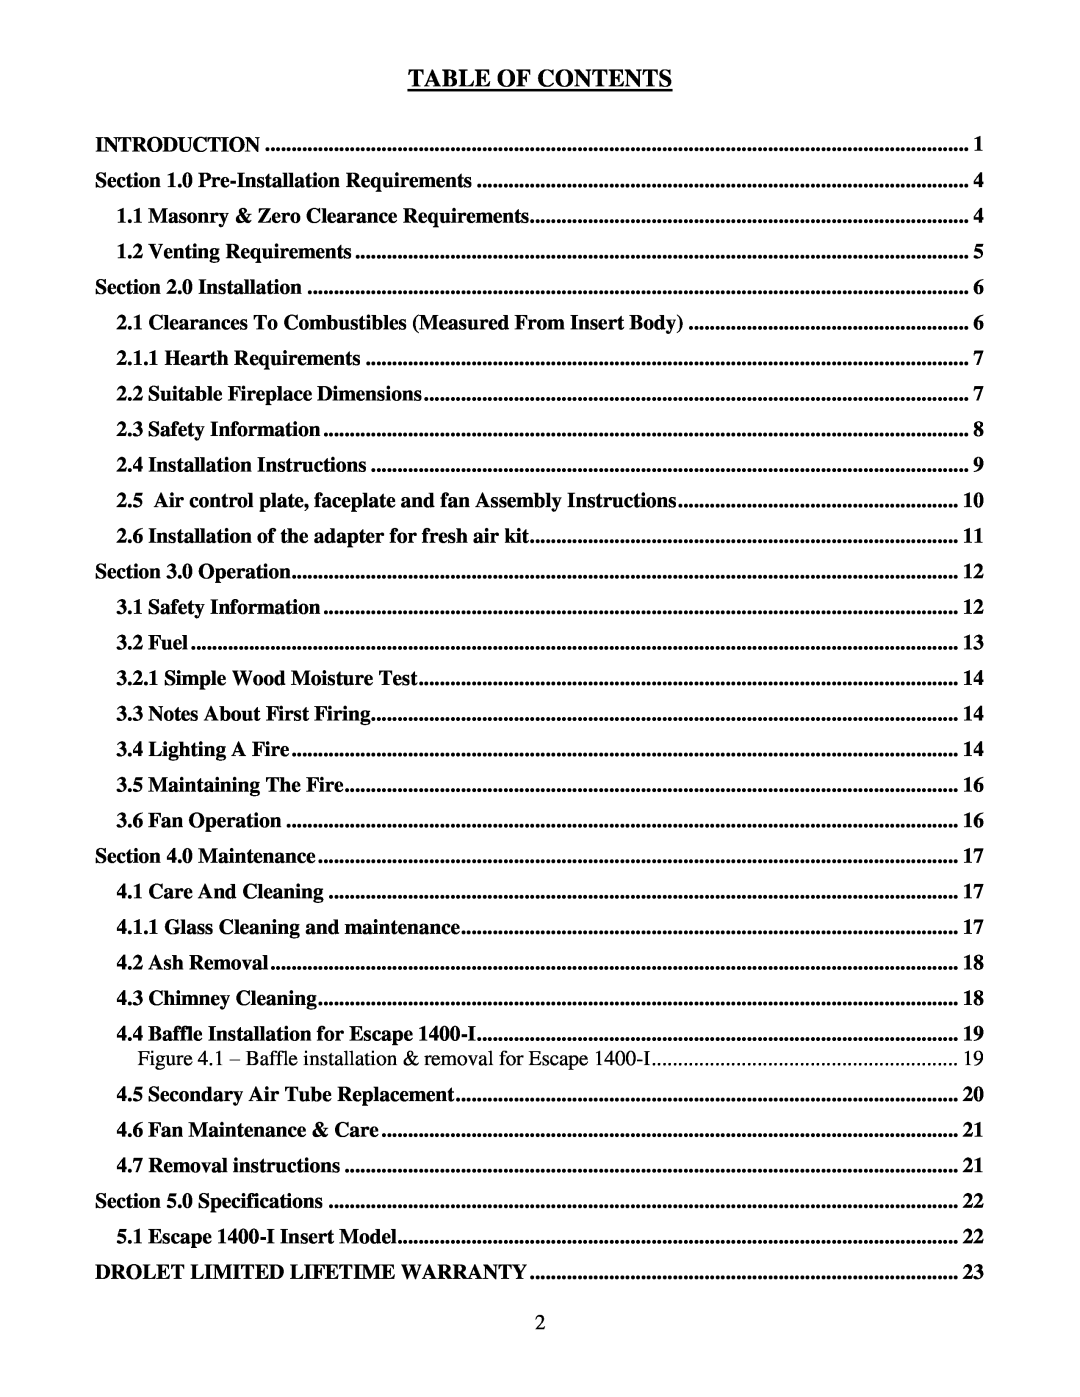 Drolet 45221 owner manual Table Of Contents 